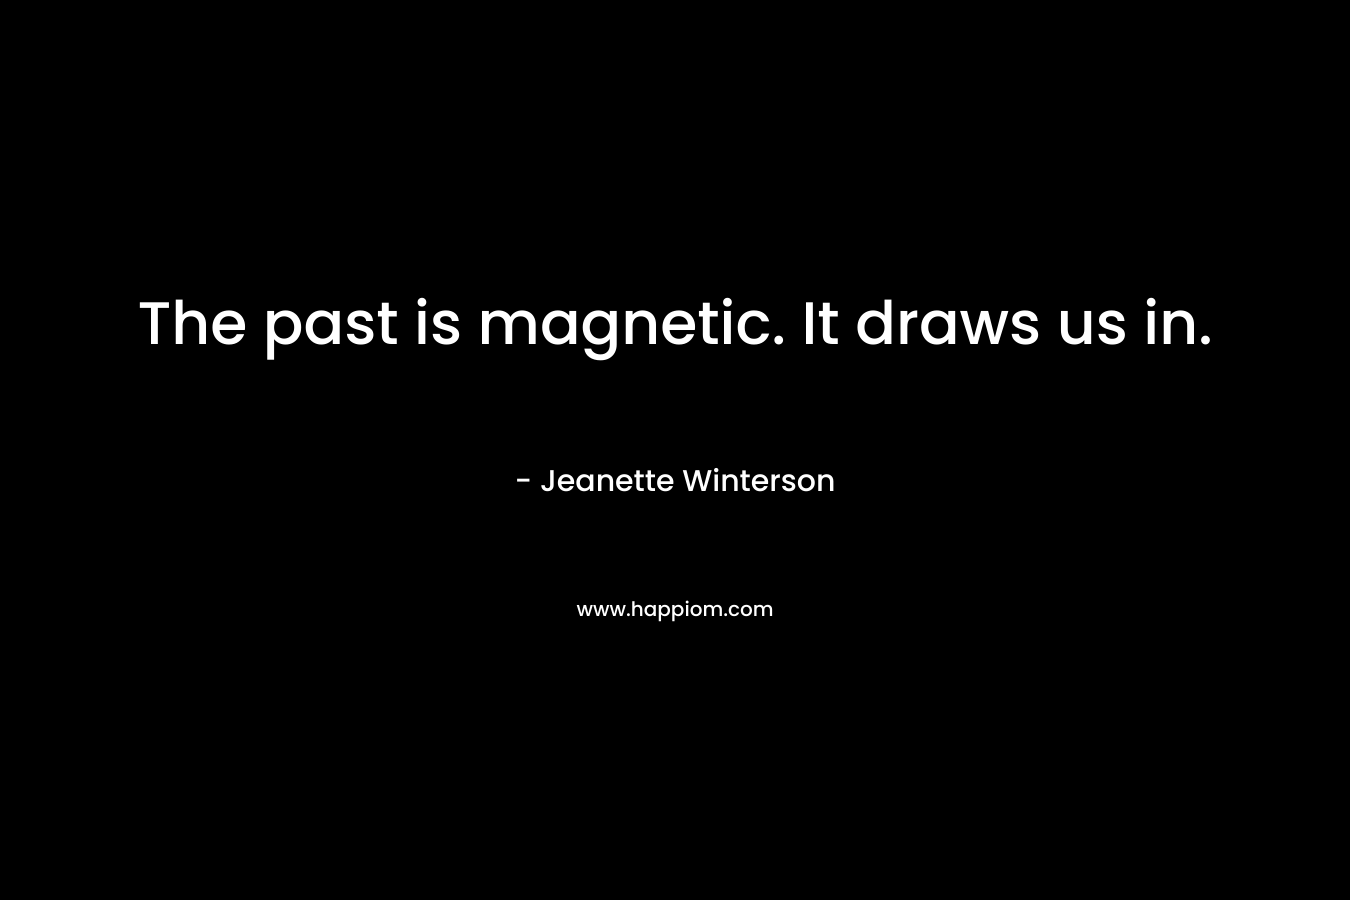 The past is magnetic. It draws us in.